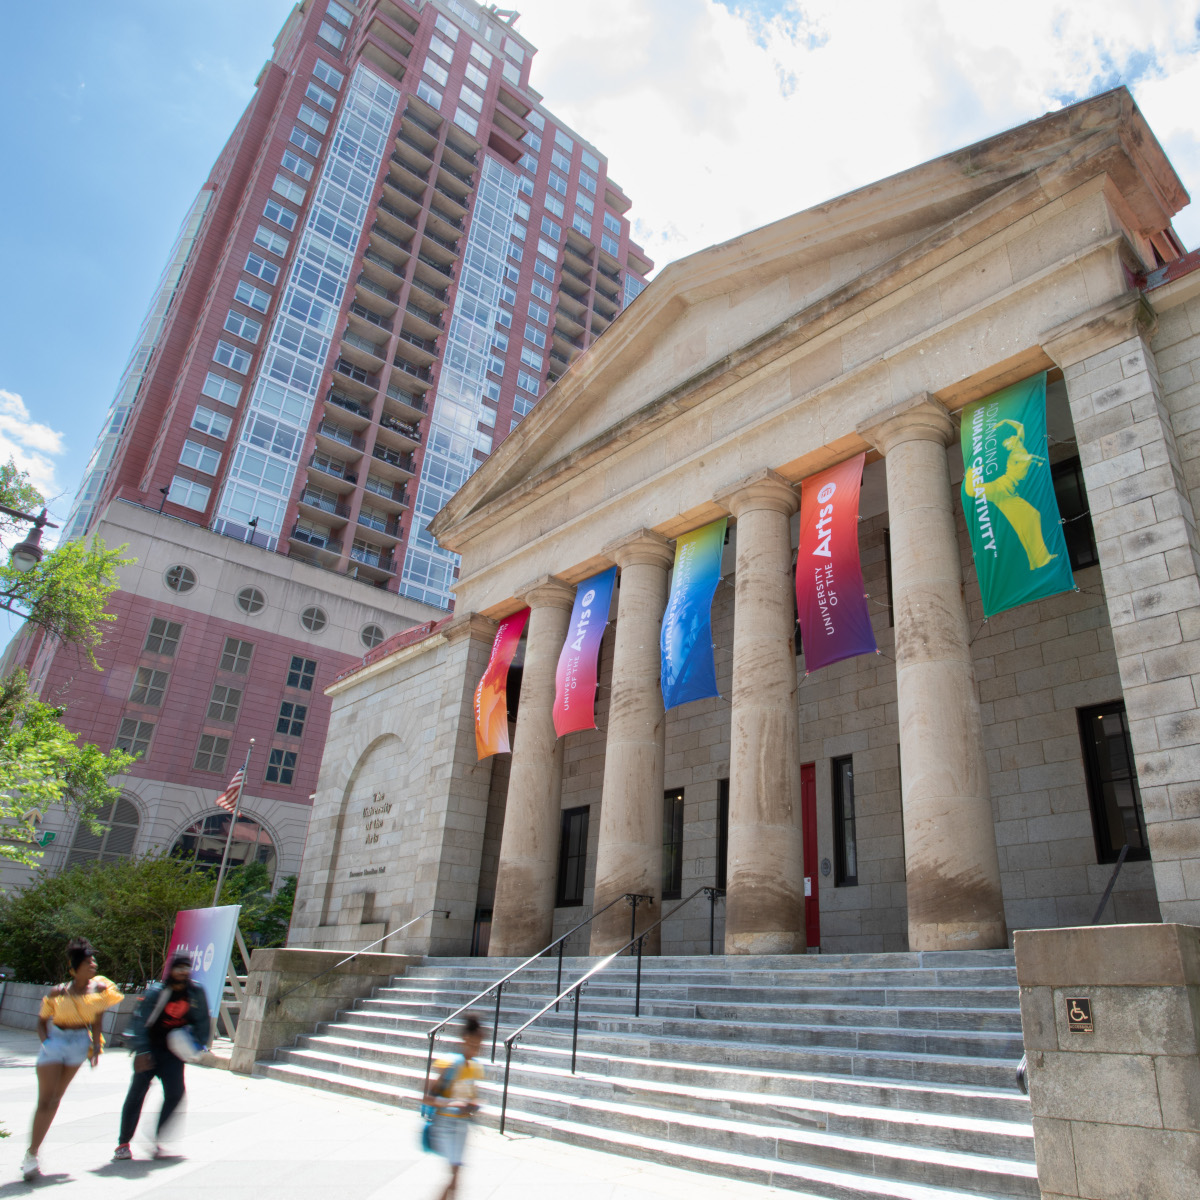 exterior view of hamilton hall, seen at about 45 degree angle from facing the facade. a short flight of stairs leads up to the marble facade, where four pillars support an ornate carved roof element. five rectangular banners hang in the empty spaces around the pillars, with uarts logotypes displayed on beautiful color gradients. 